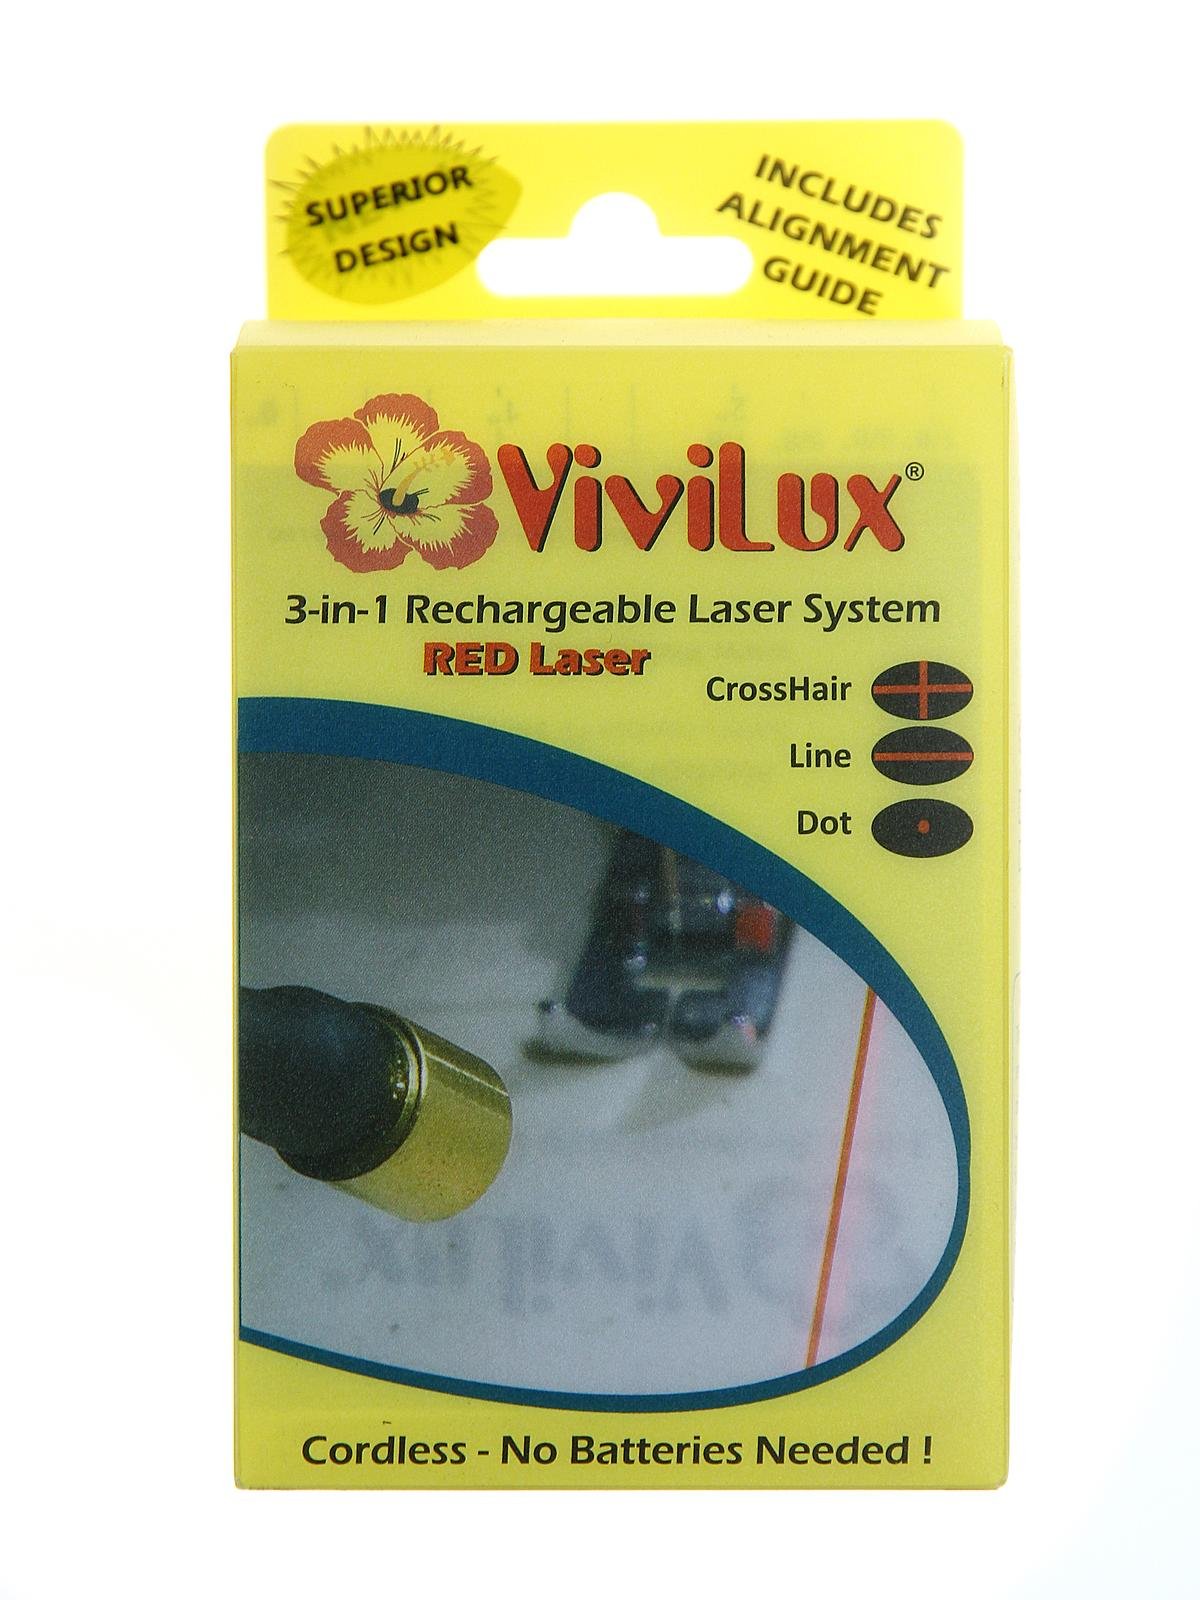 Vivilux - 3-in-1 Rechargeable Laser System